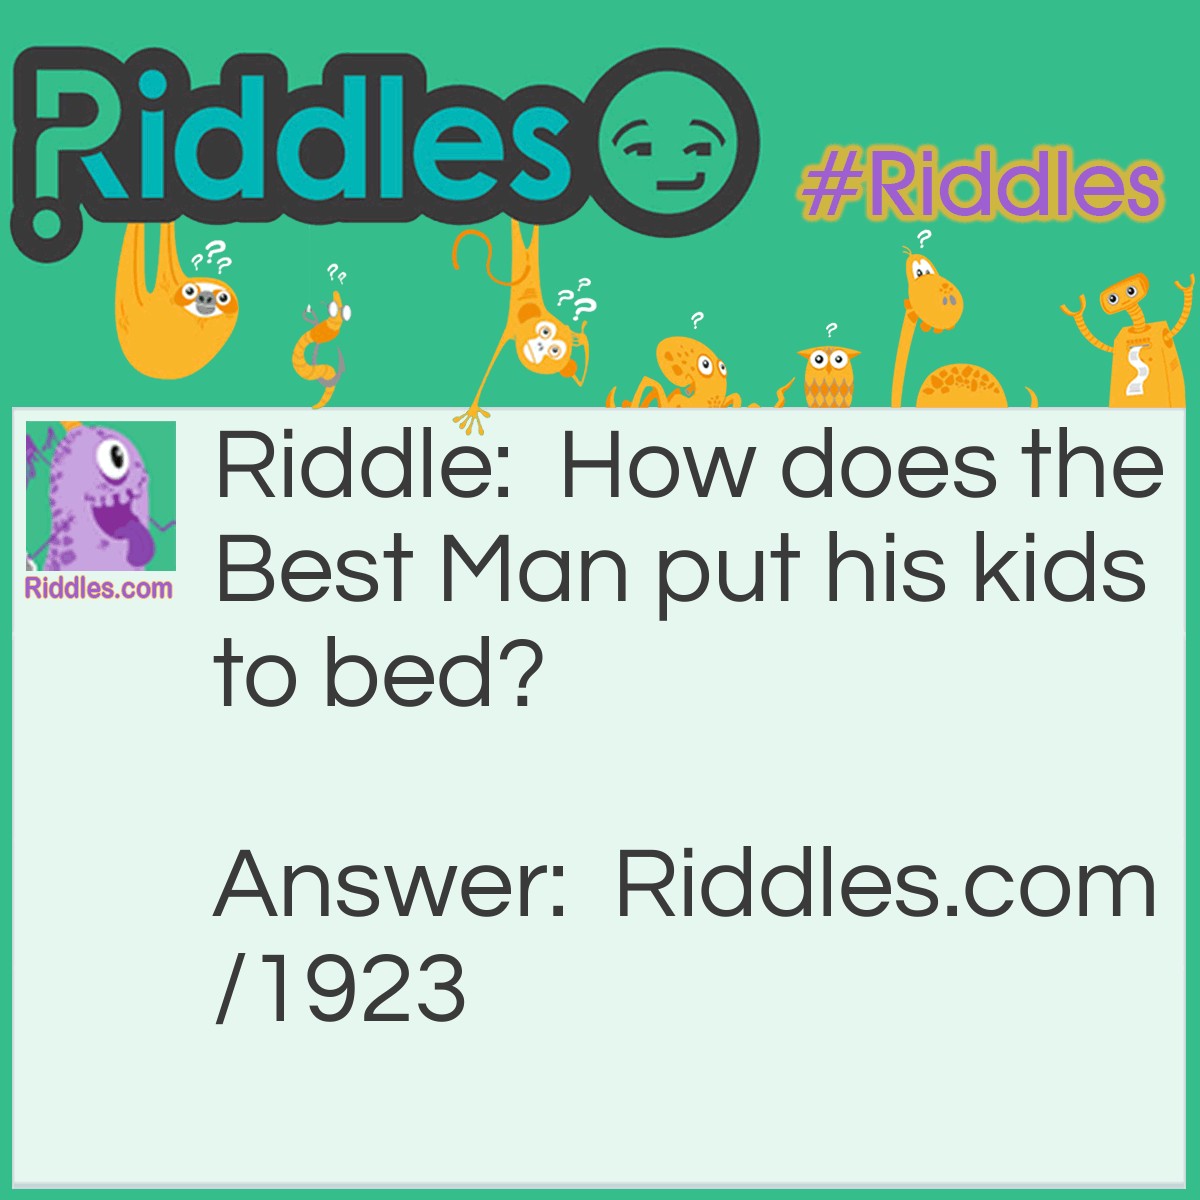 Riddle: How does the Best Man put his kids to bed? Answer: He tux them in.